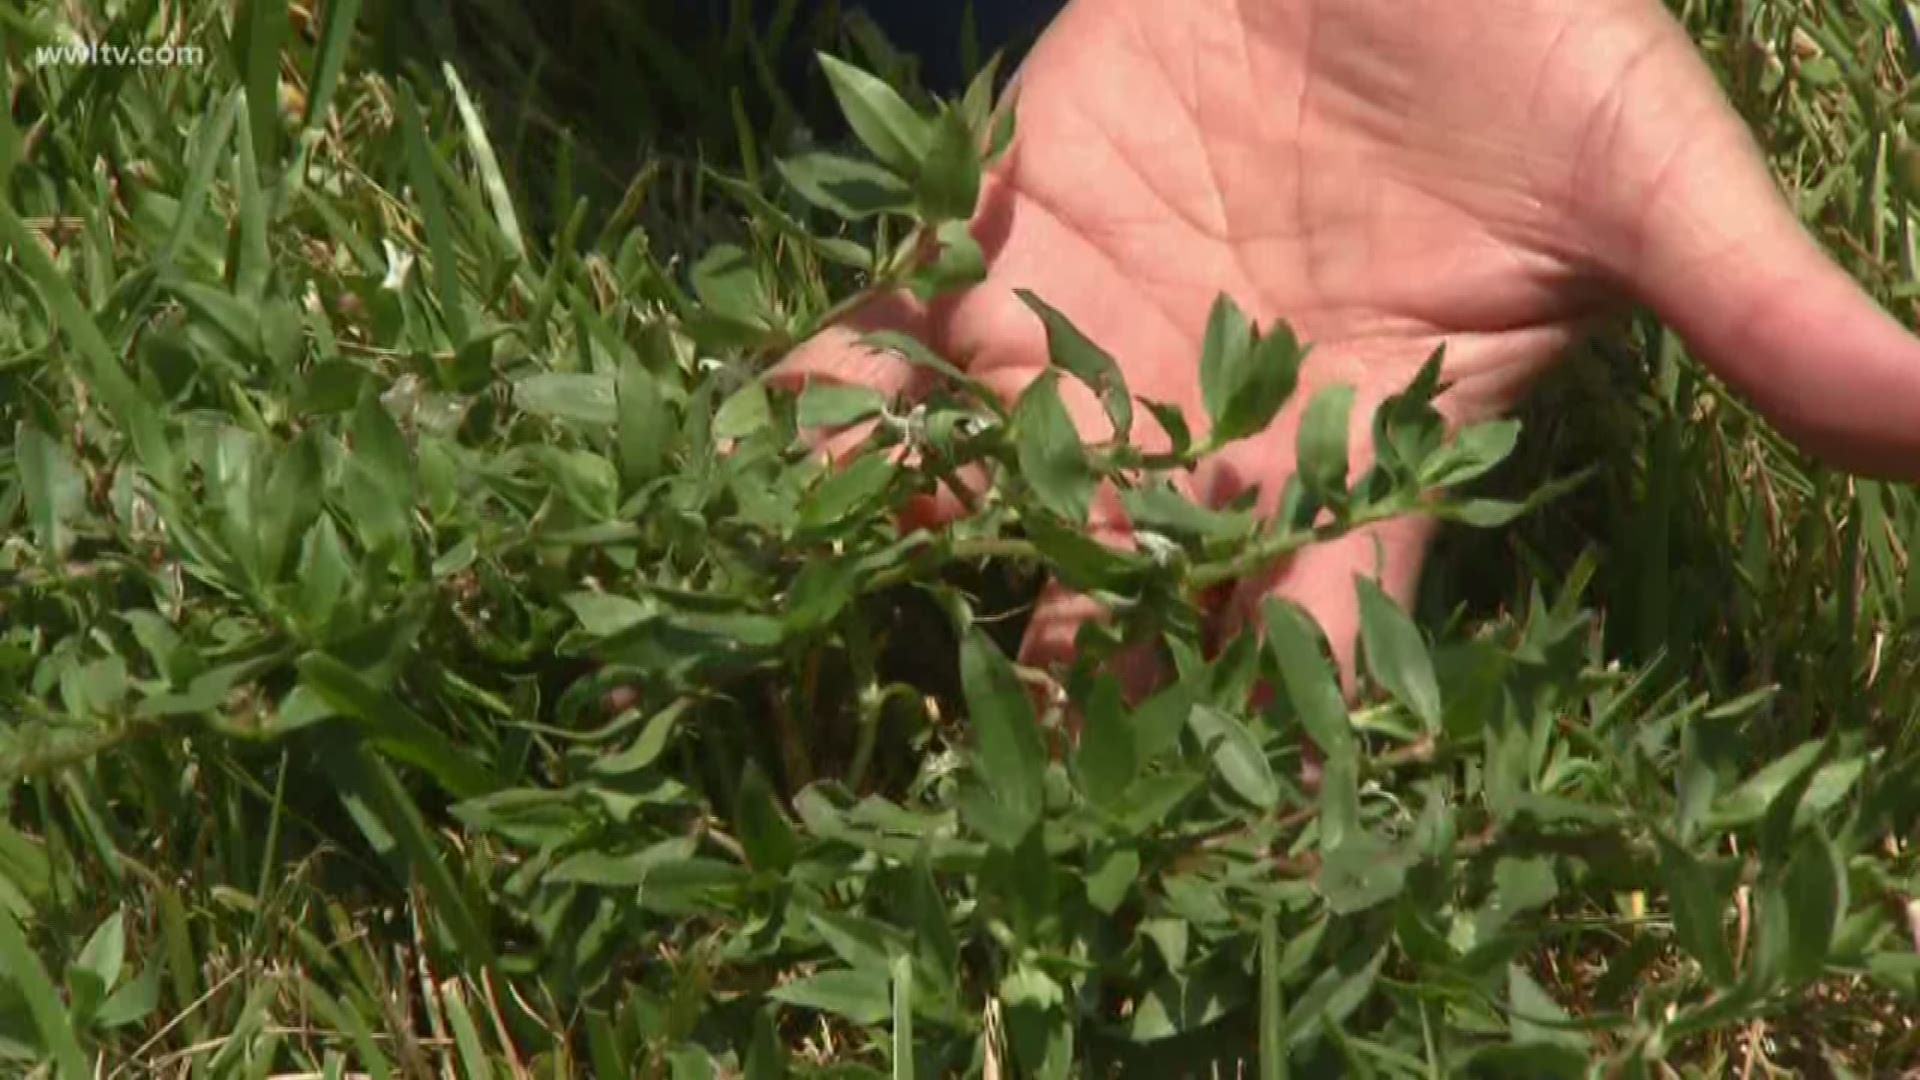 LSU Ag Center is helping you battle the Virginia Buttonweed in your lawn.